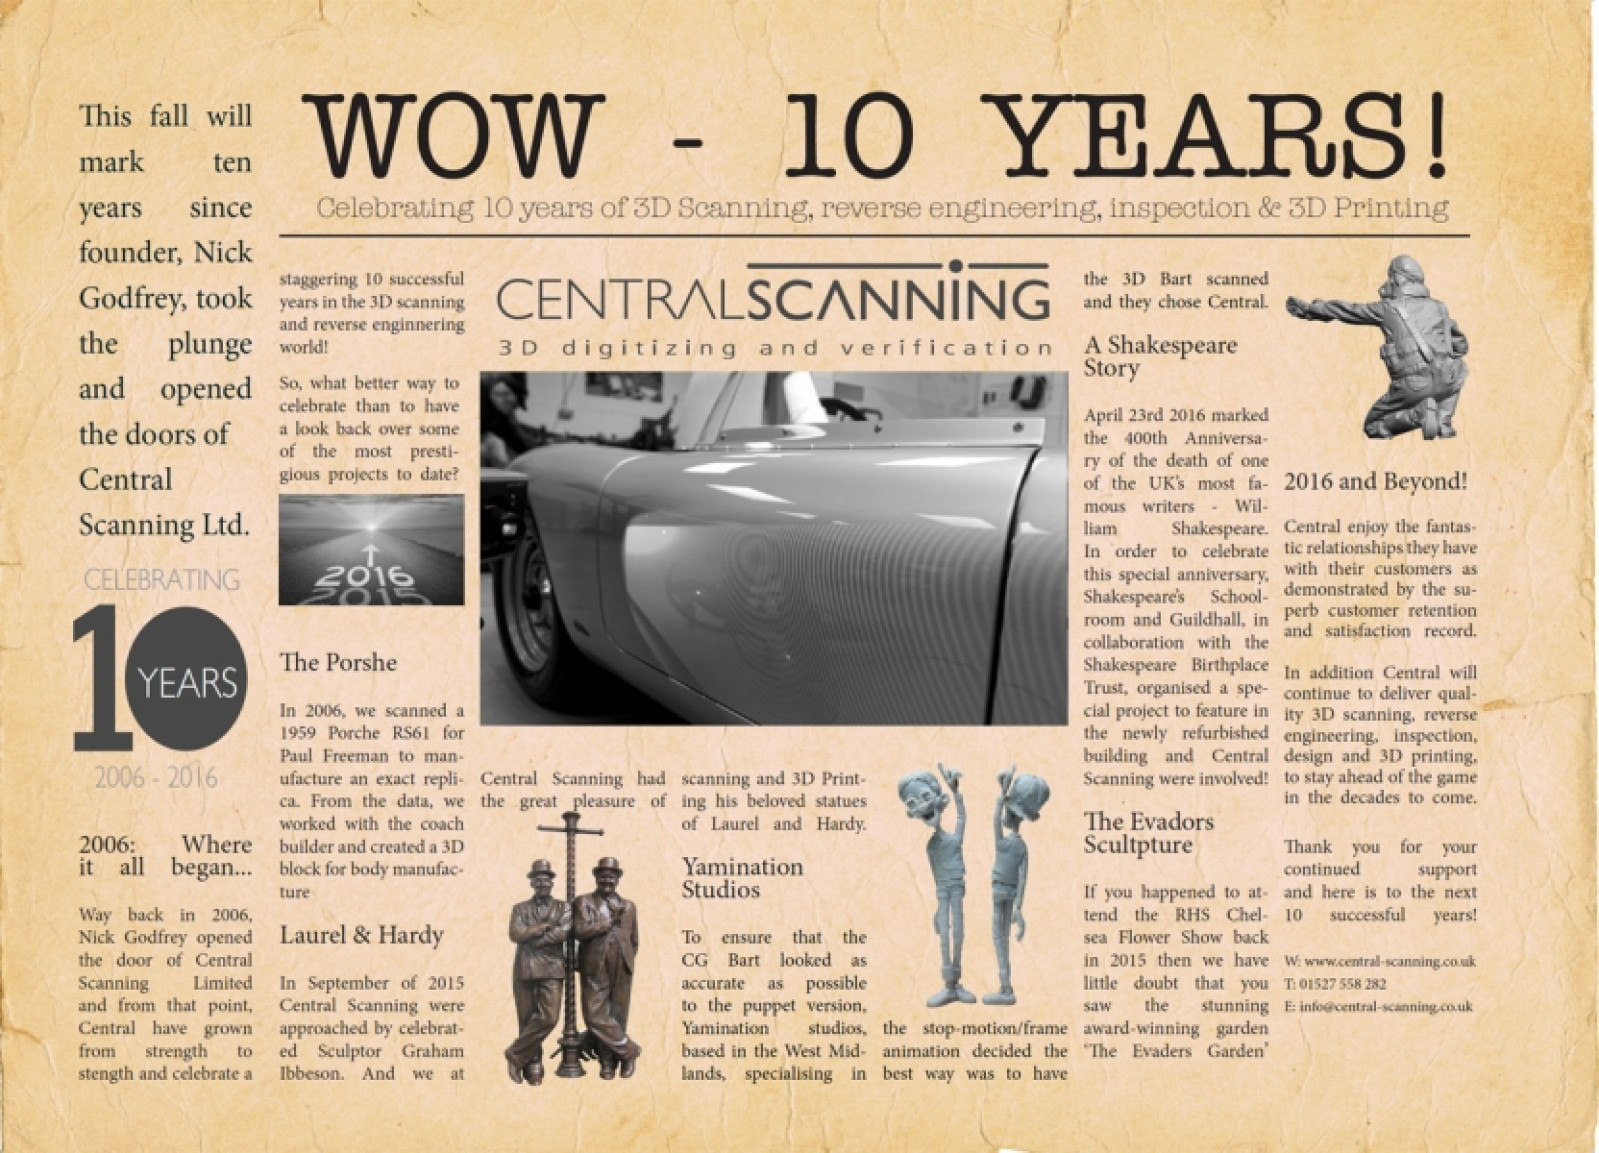 Central Scanning Celebrate 10 Years of Trading